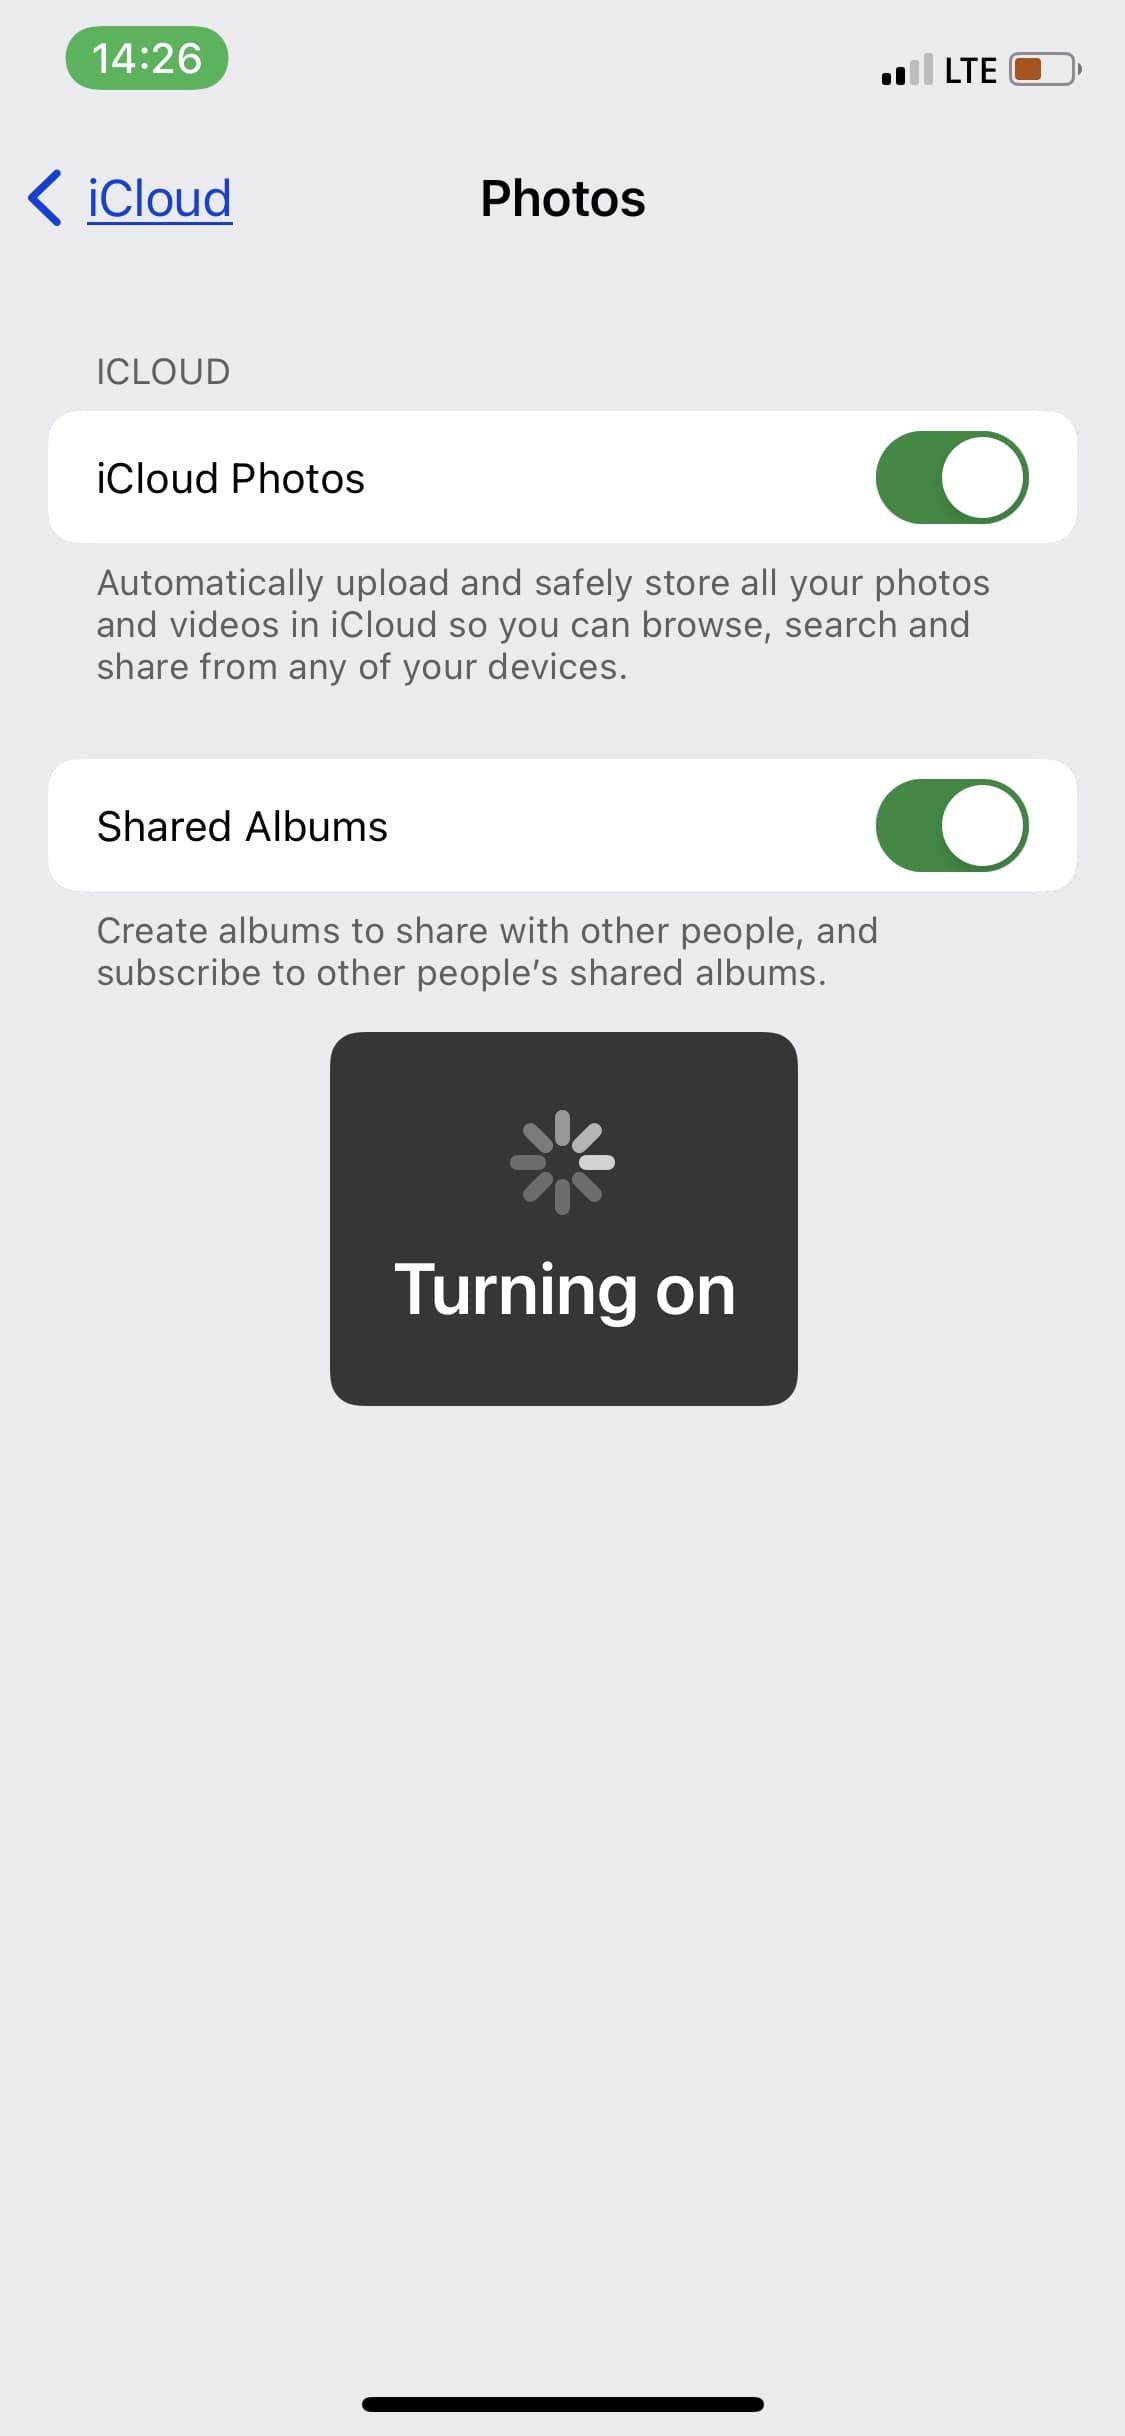 iPhone settings page showing iCloud Photos switch toggled on